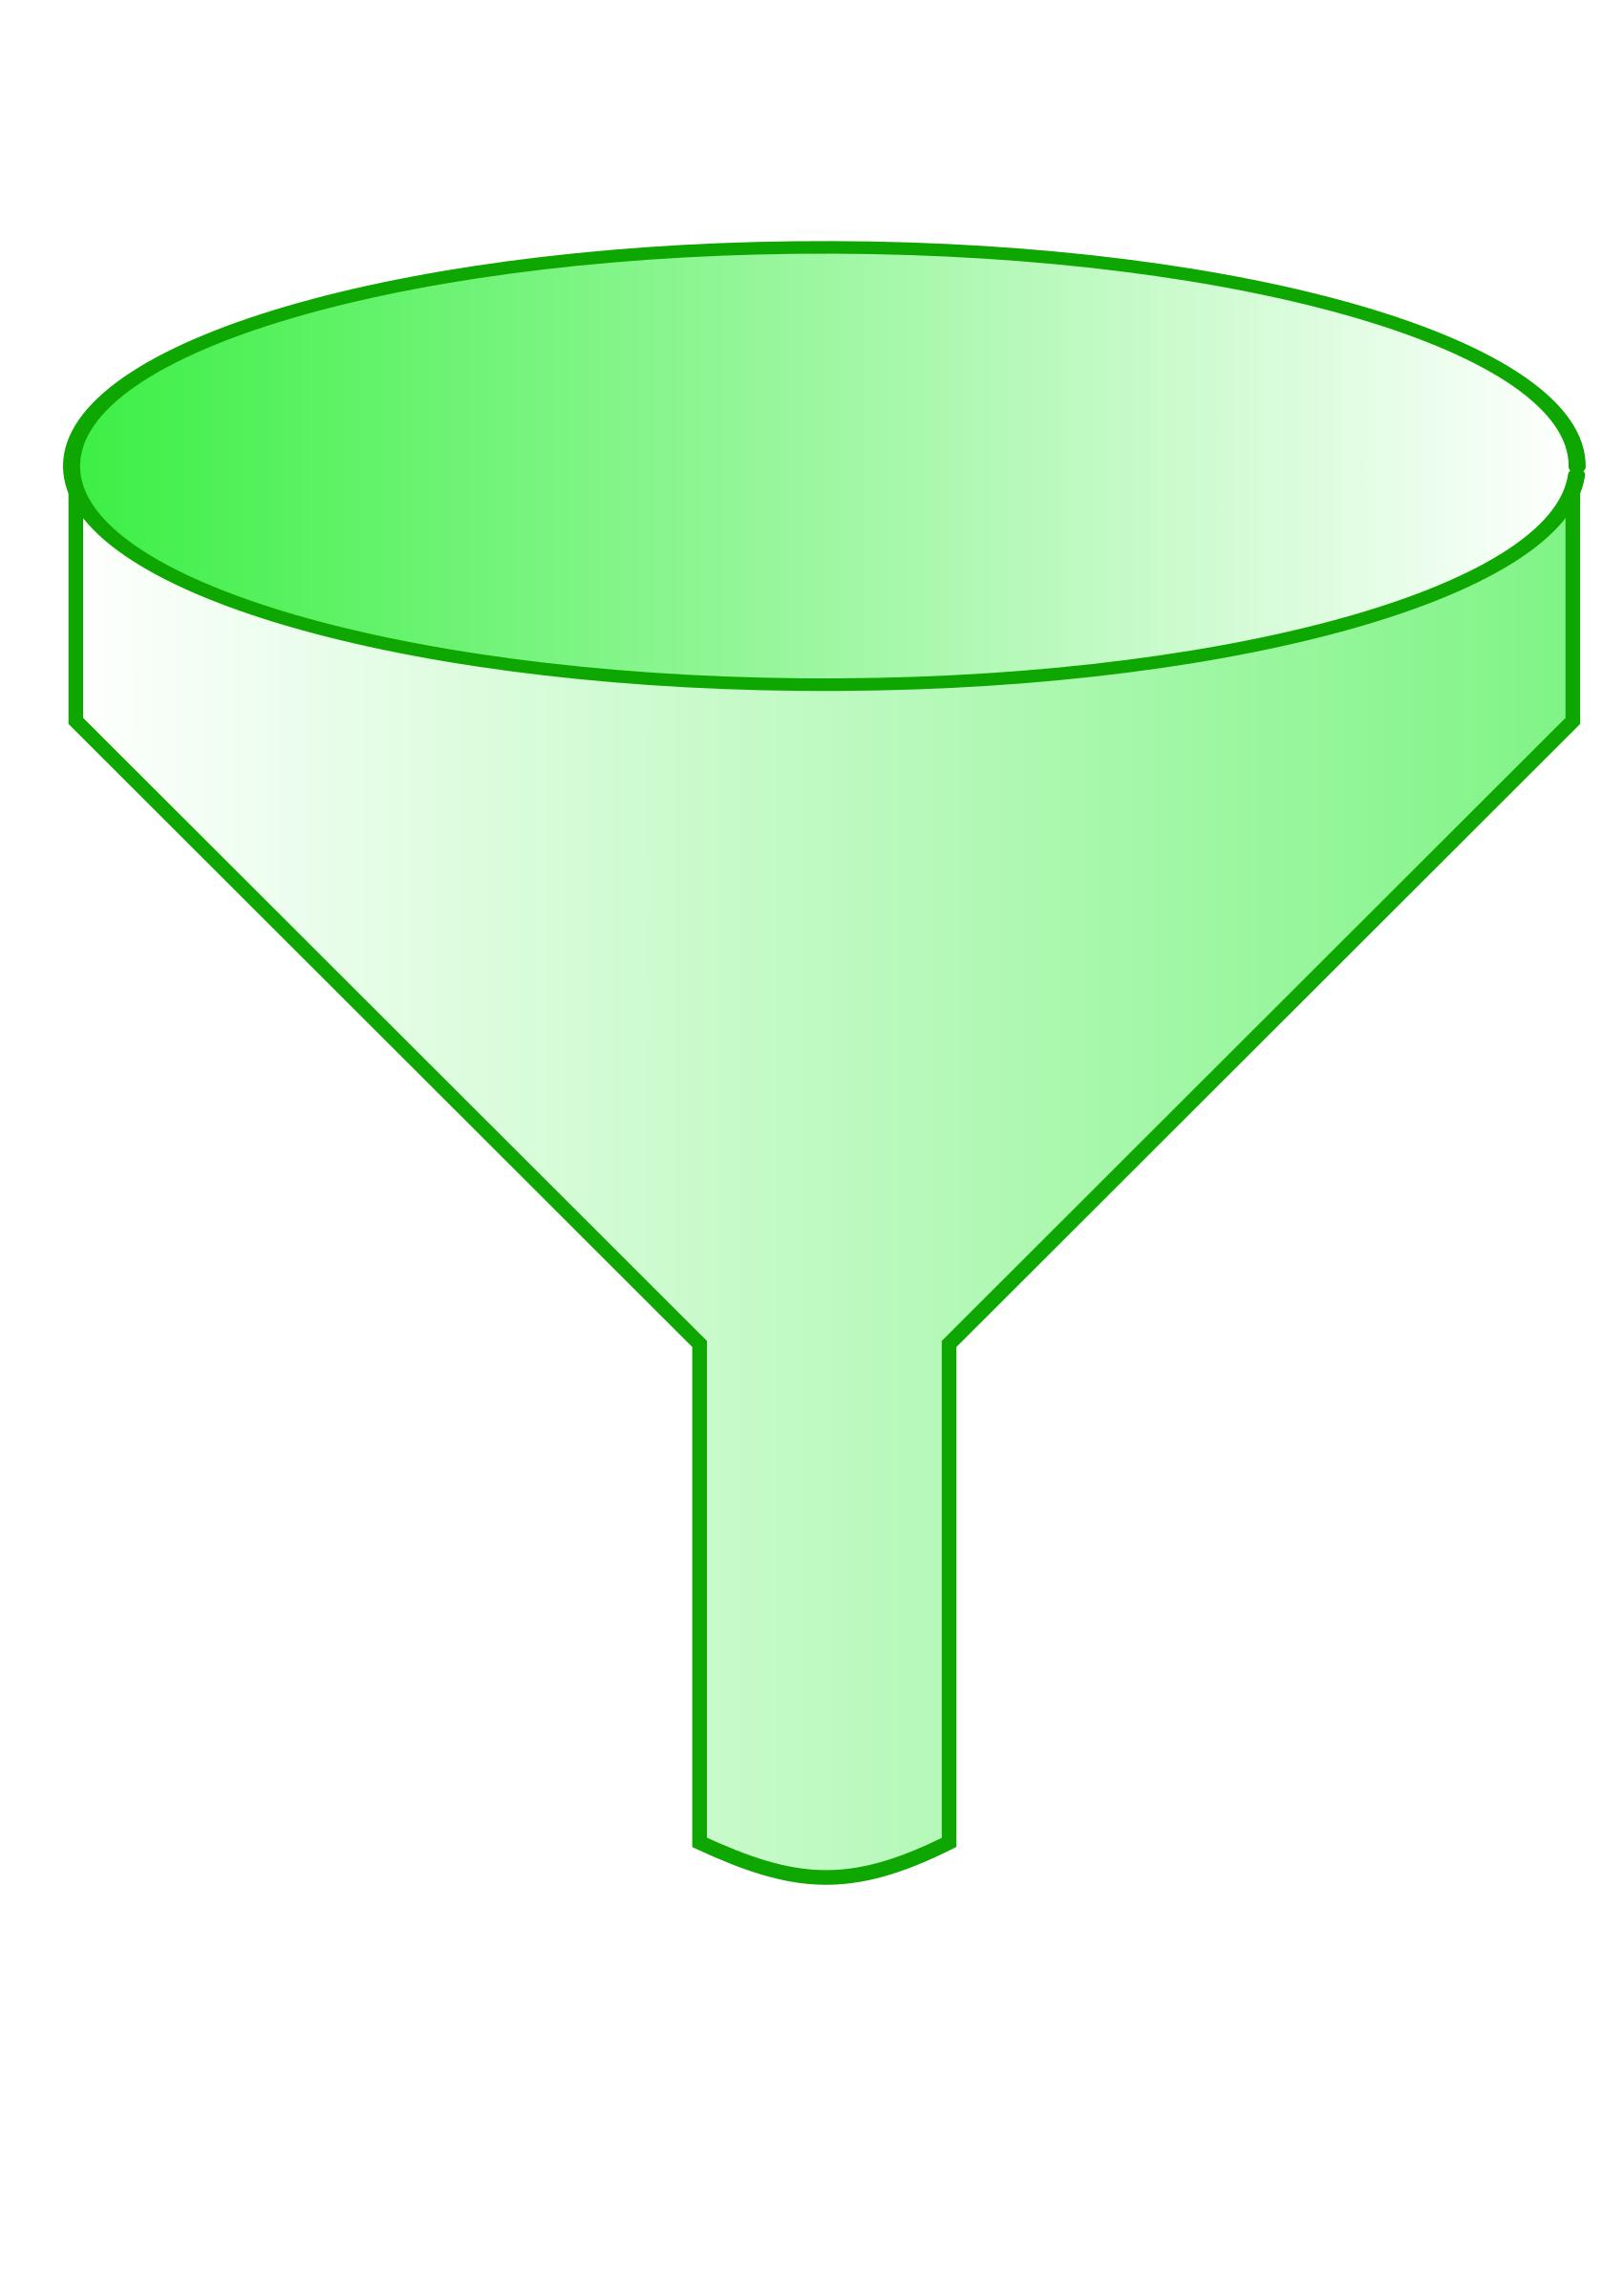 green funnel PNG icons